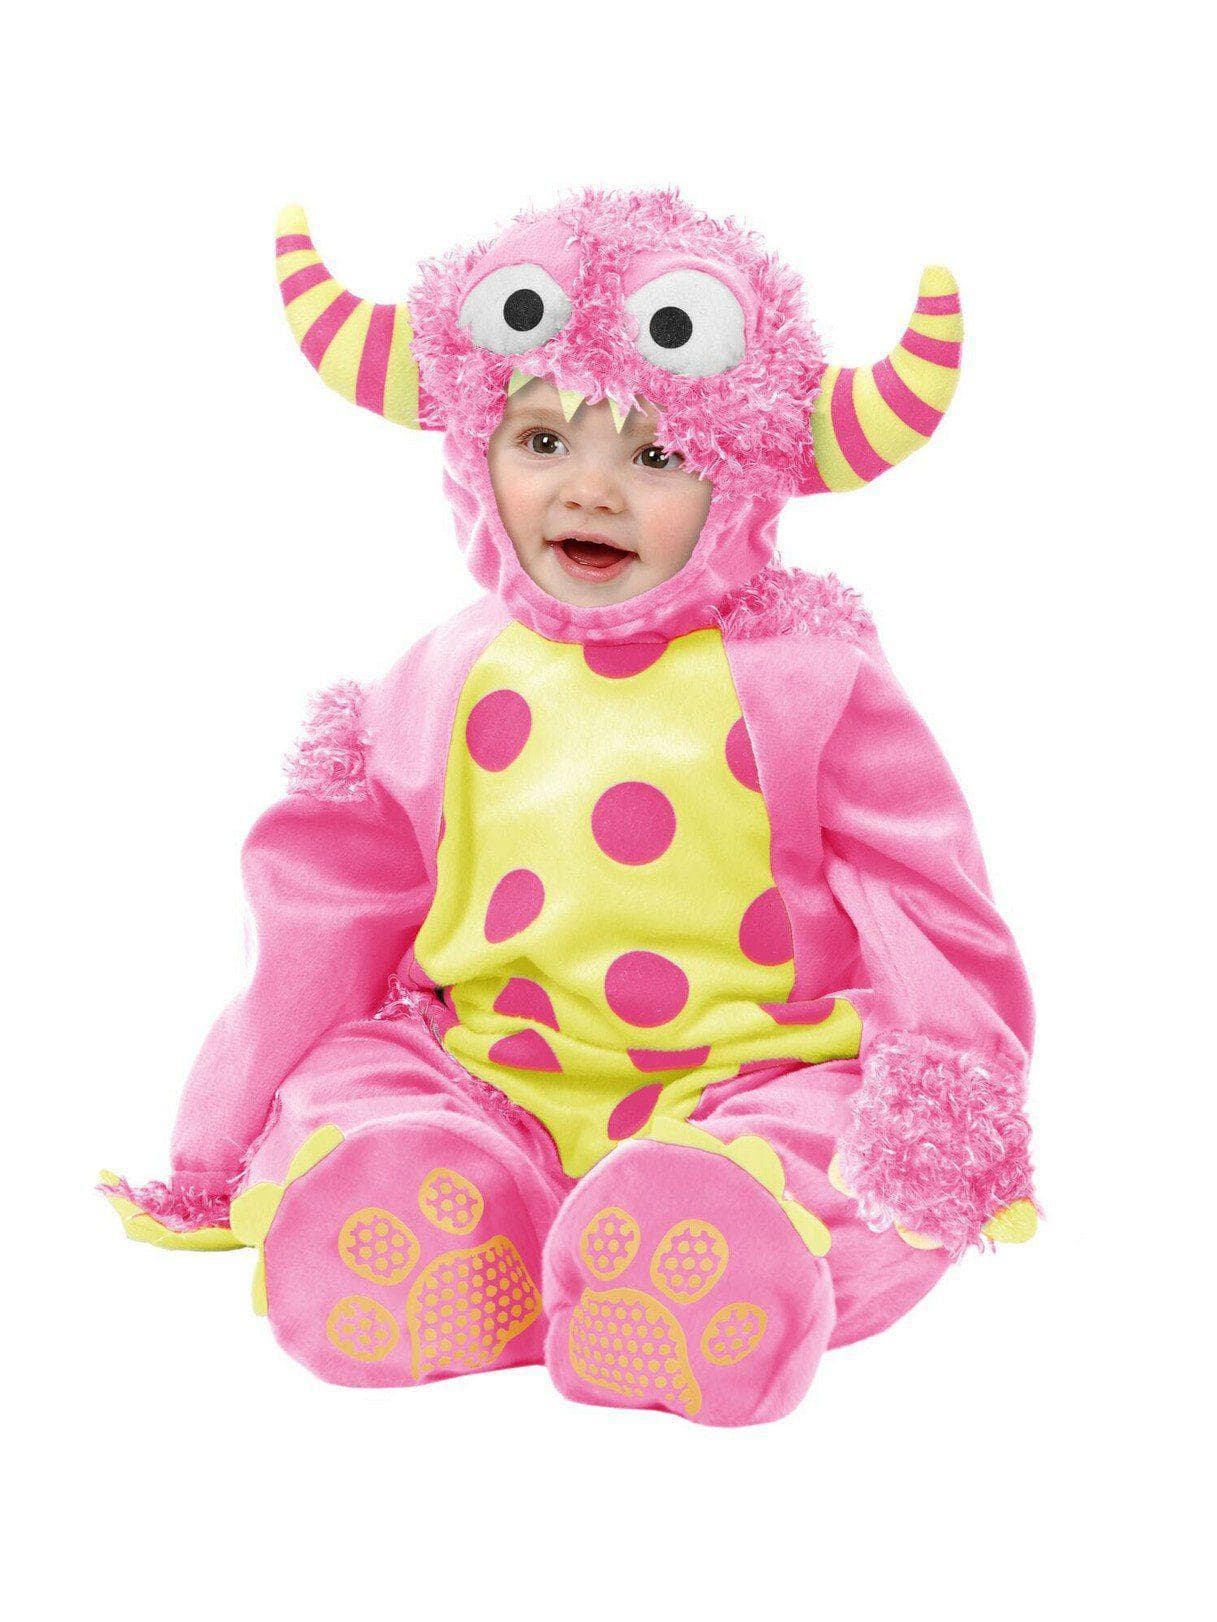 Baby/Toddler Mini Monster Pink Costume - costumes.com